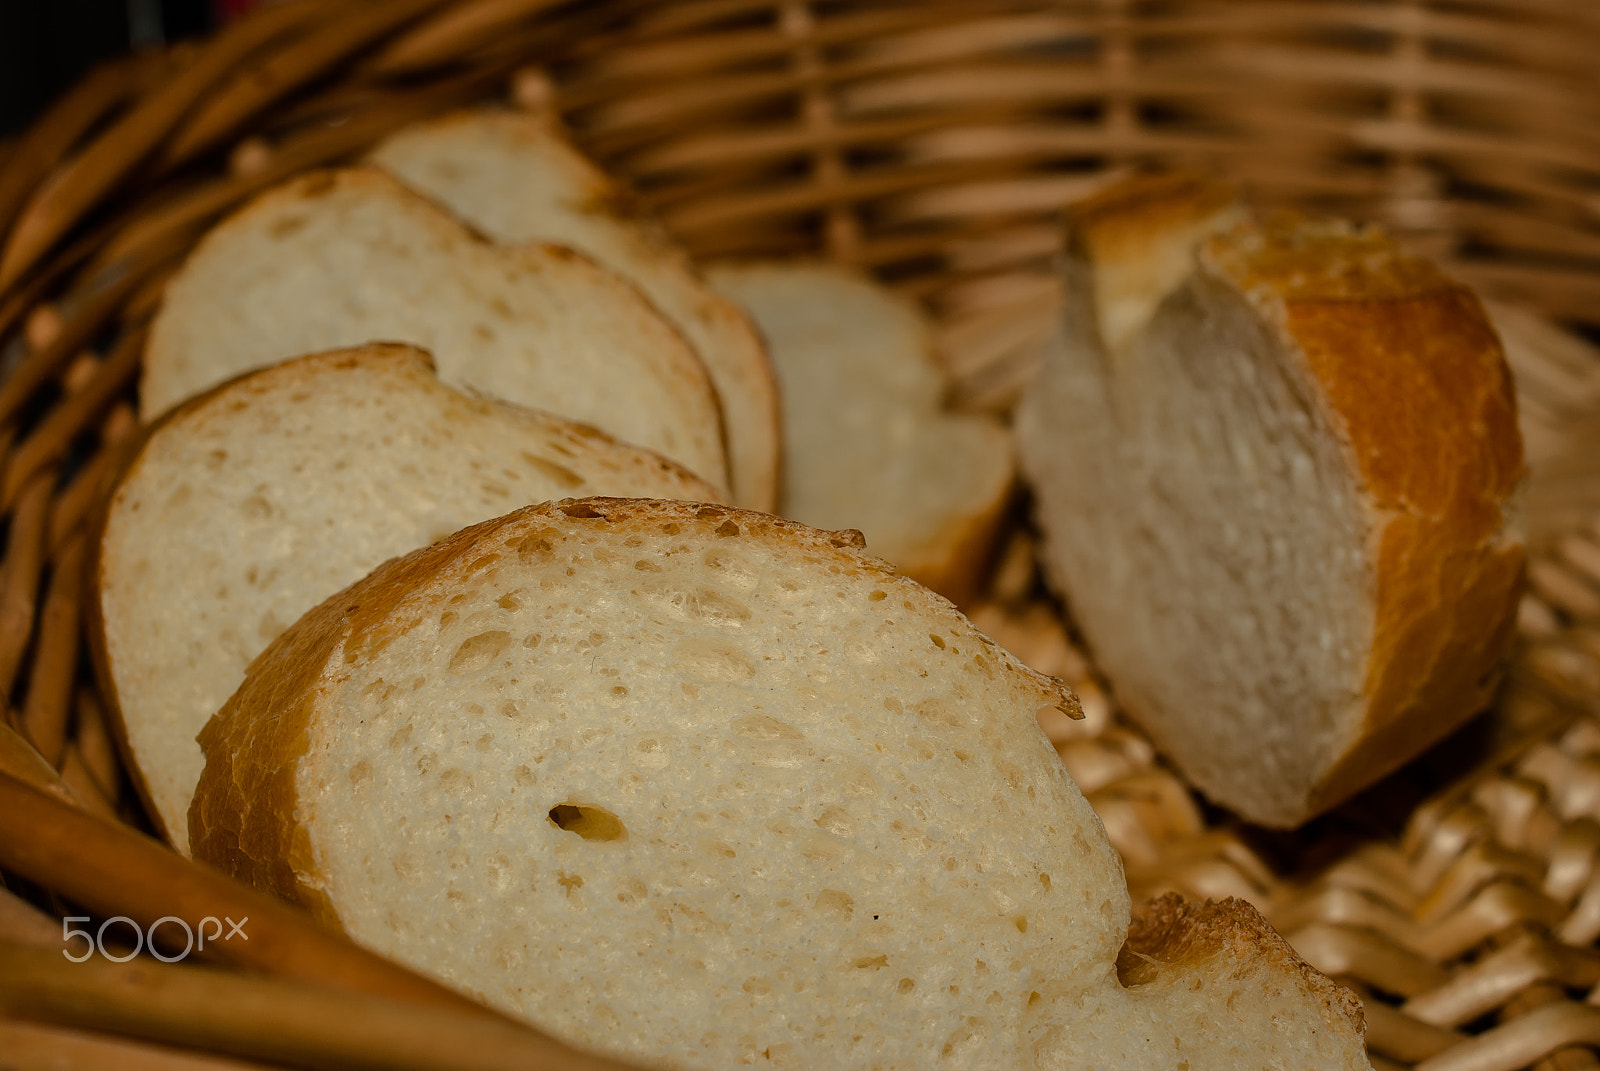 Pentax K200D sample photo. Slices of bread photography